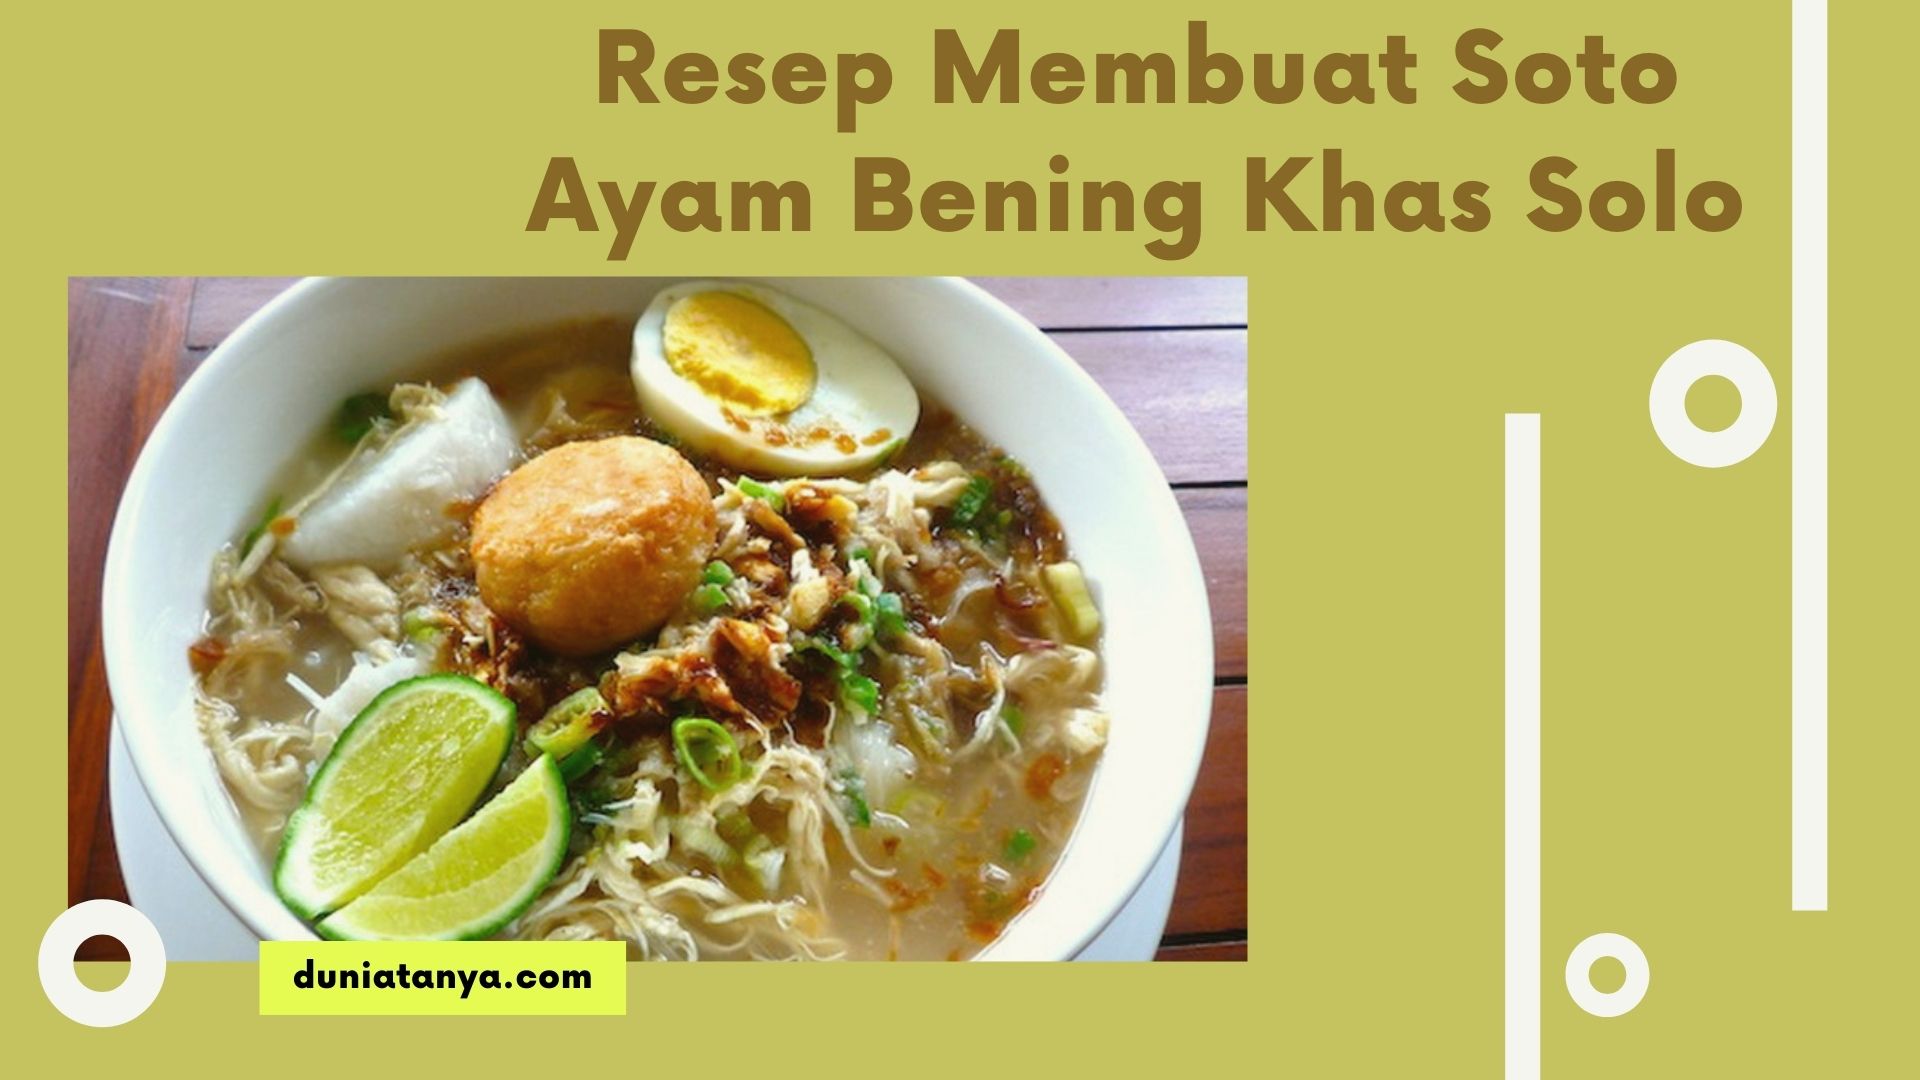 You are currently viewing Resep Membuat Soto Ayam Bening Khas Solo